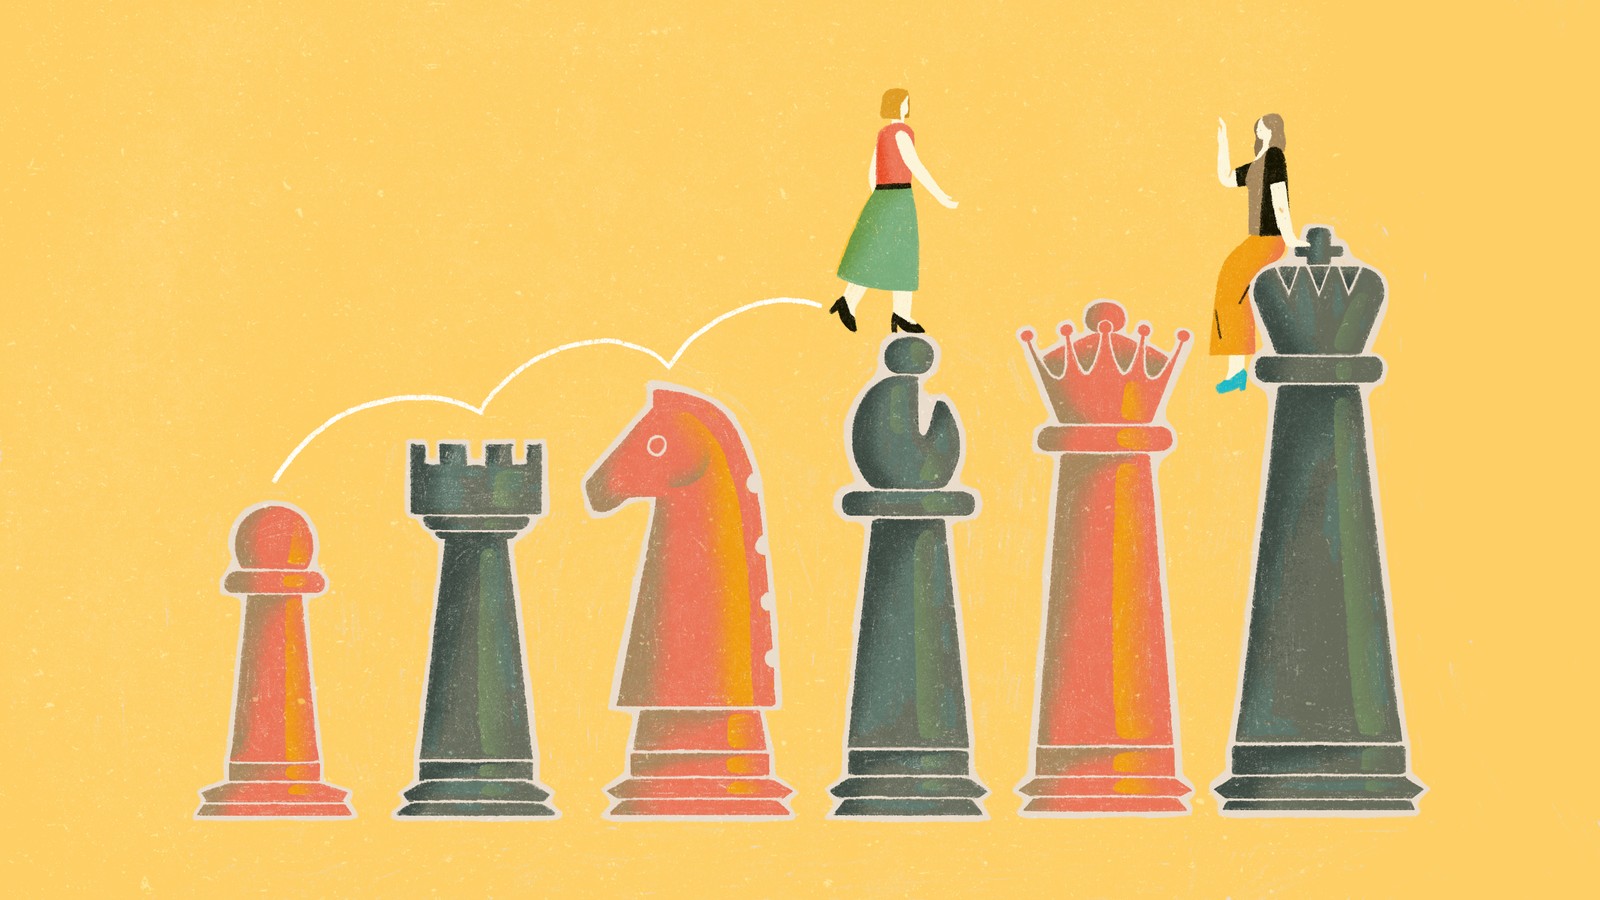 Guest Post: Gender Inequality in Chess – Skepchick